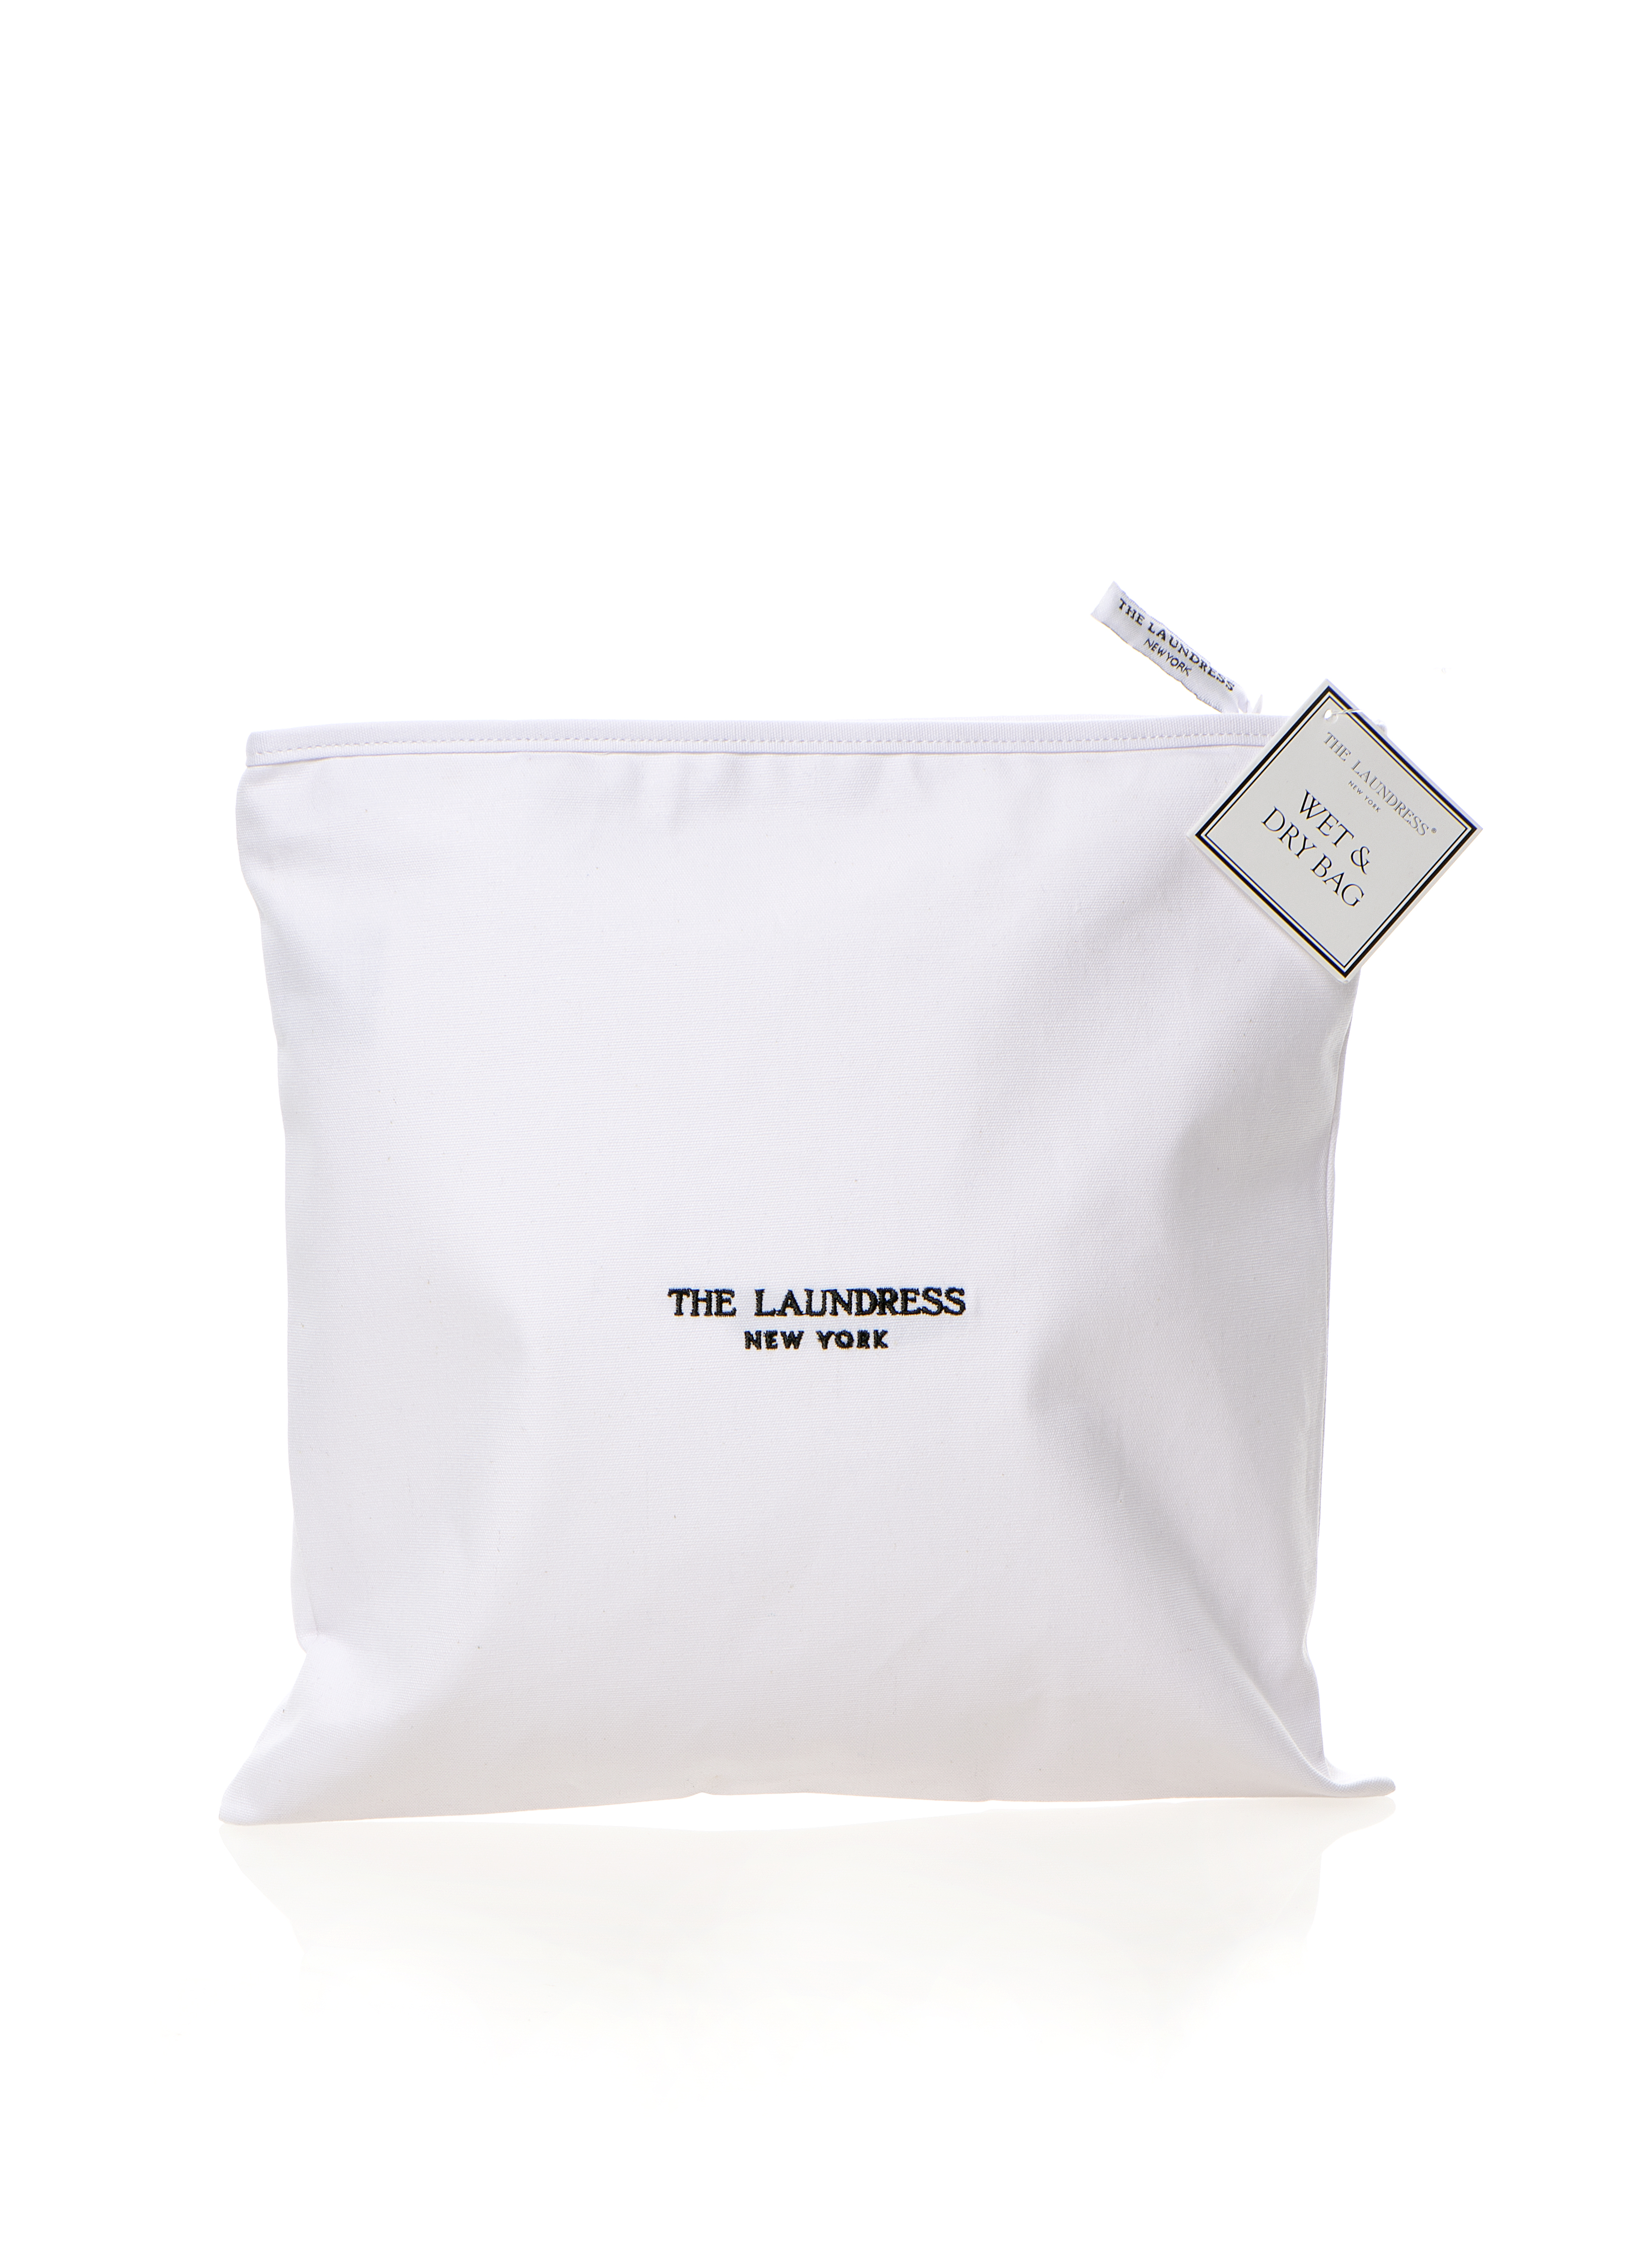 The Laundress Wet & Dry Bag, 12" x 12" - image 1 of 1